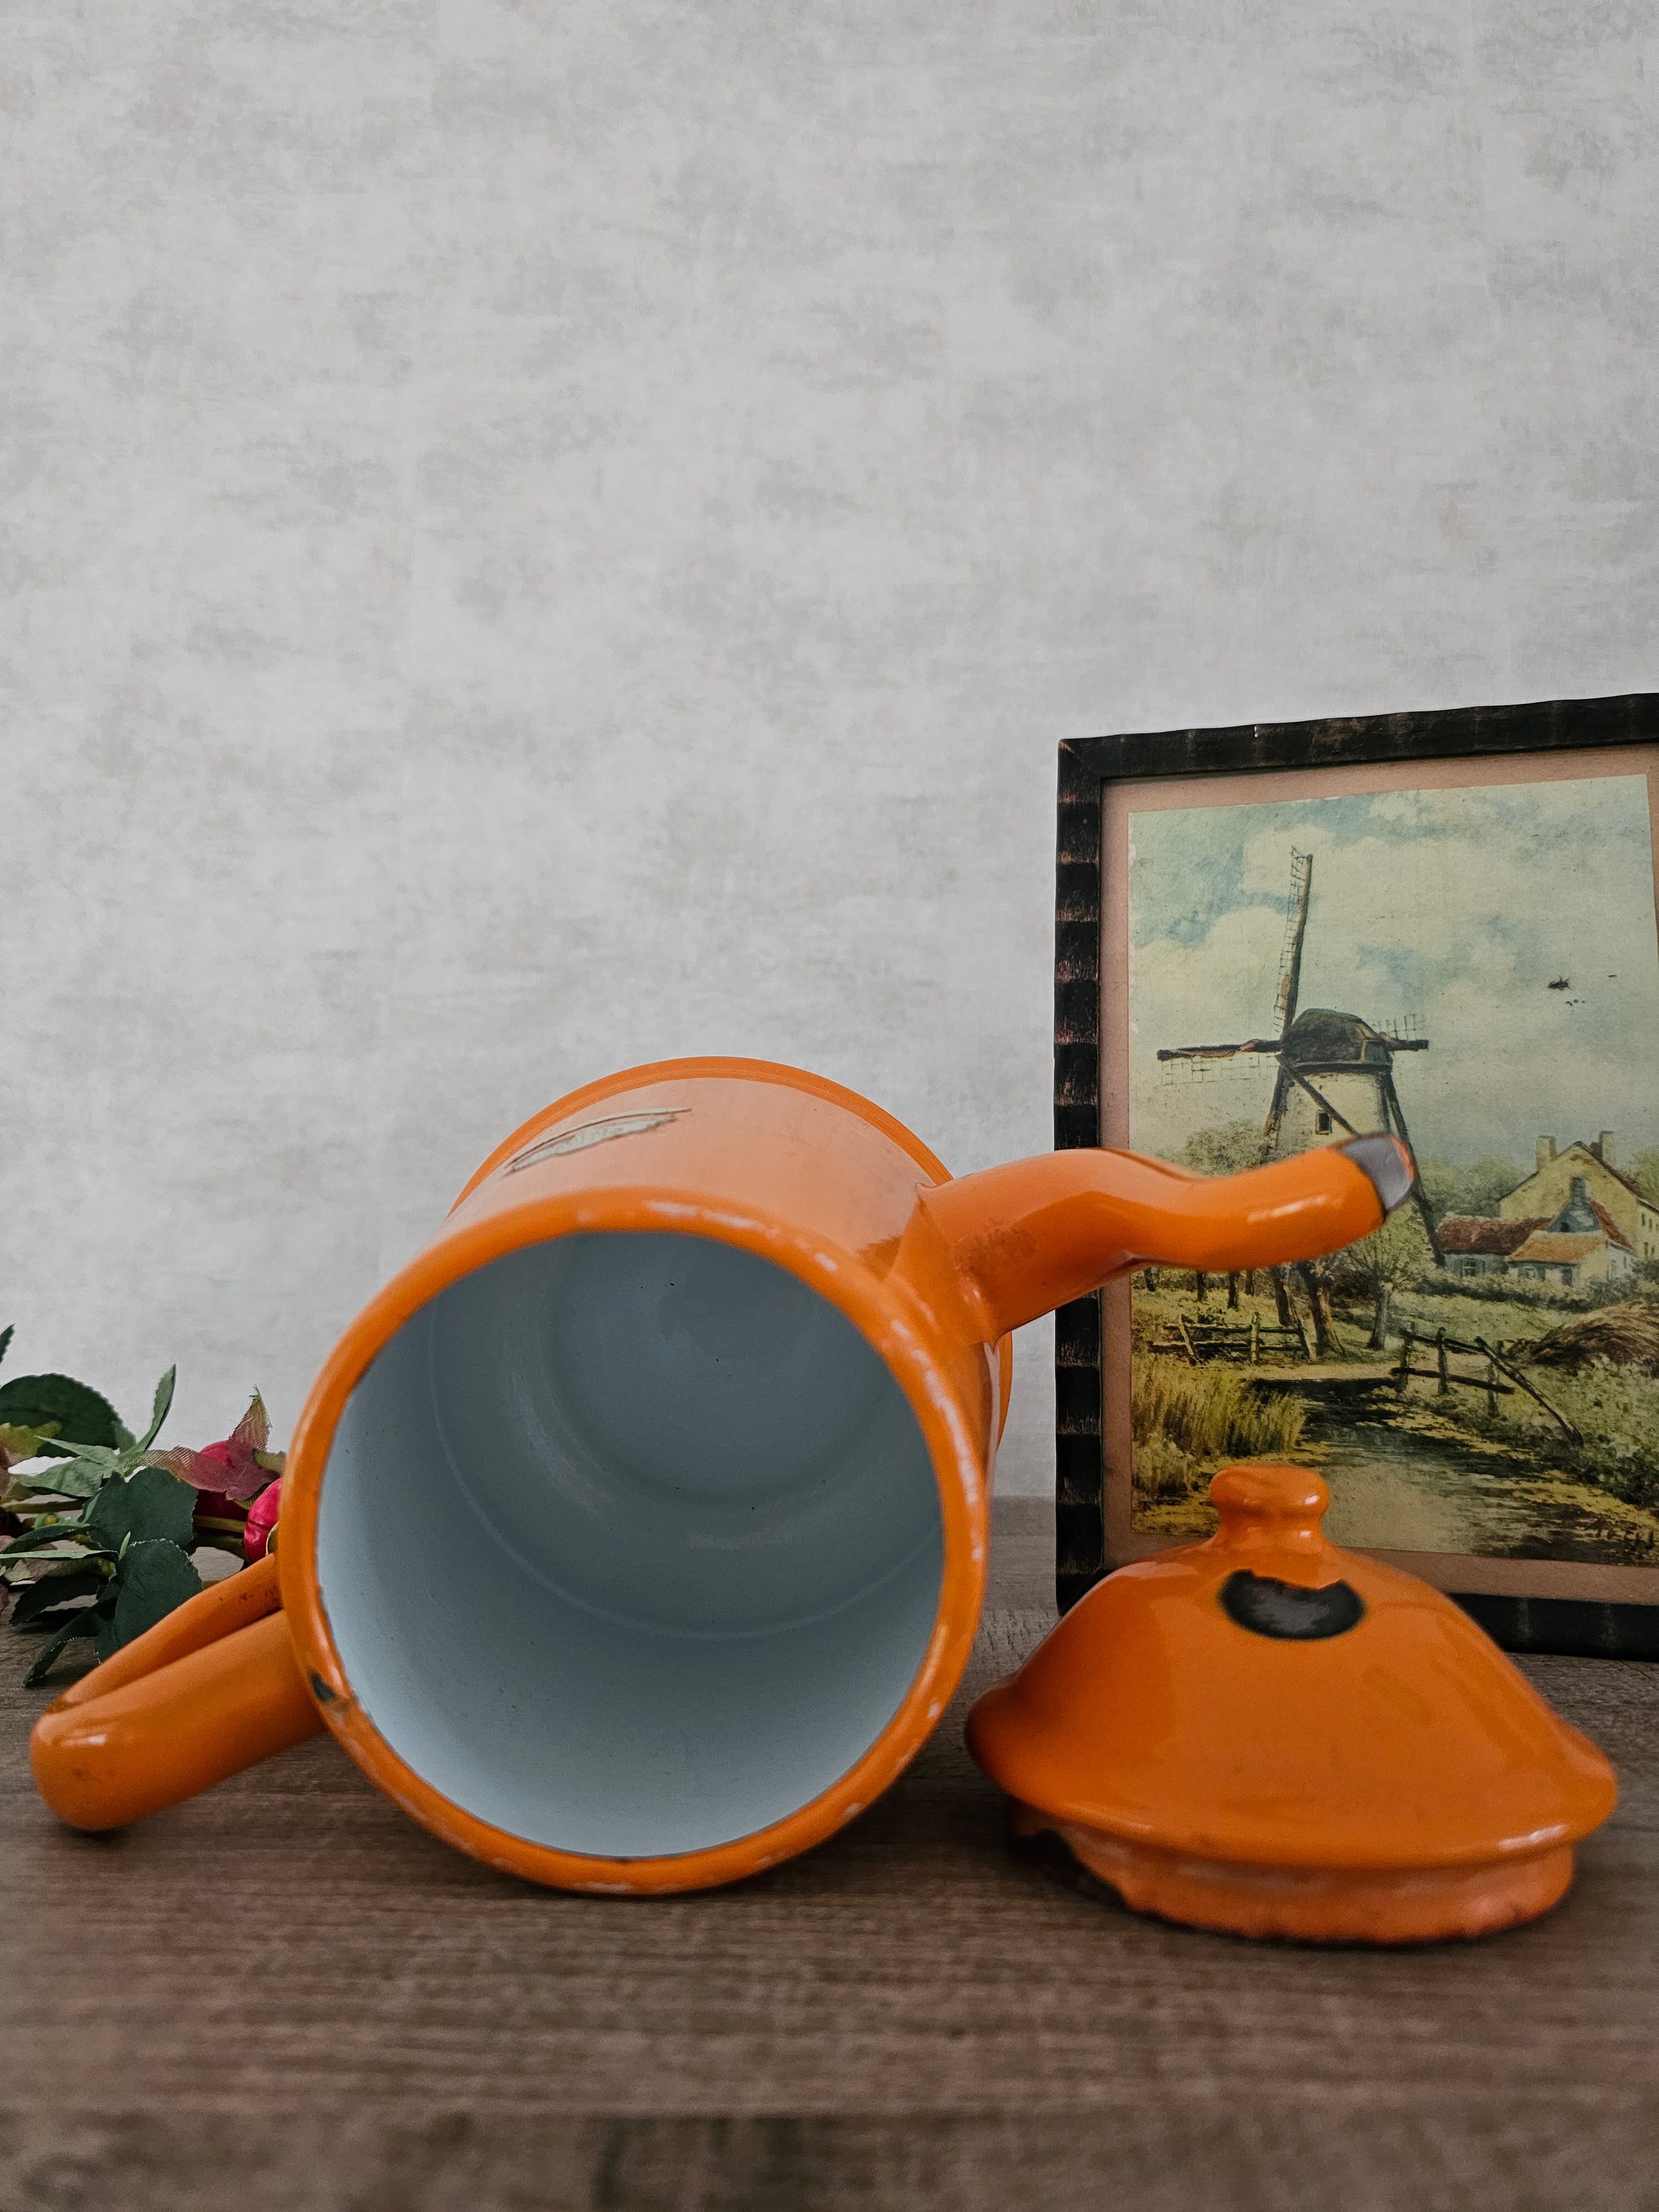 Emaille oranje koffiepot